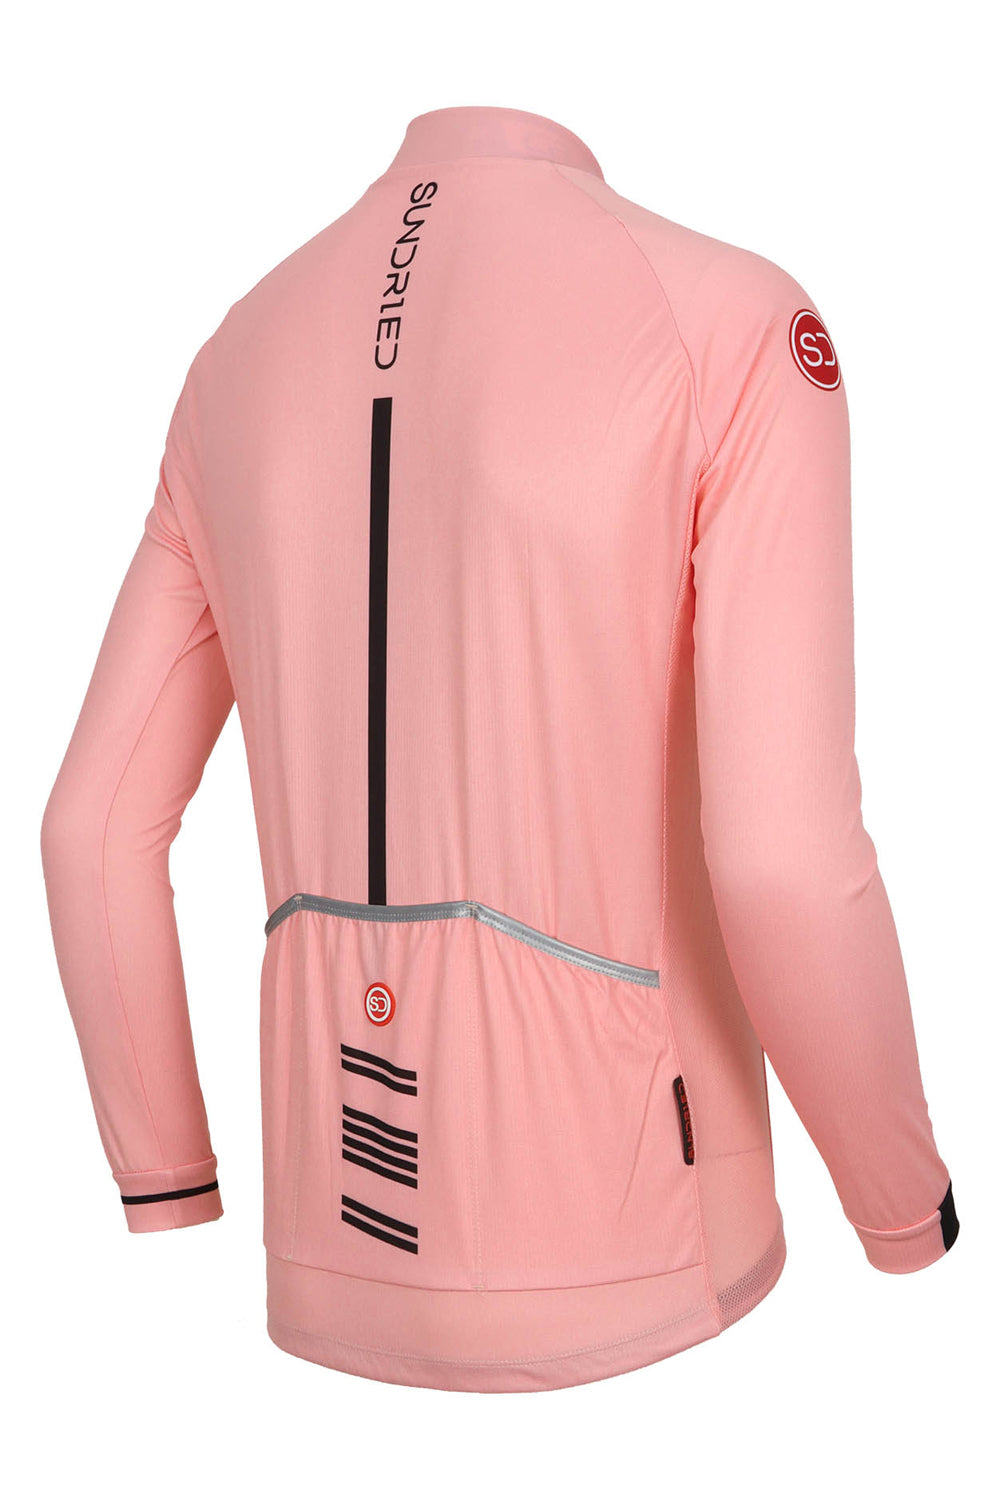 Sundried Rosa Men's Long Sleeve Cycle Jersey Long Sleeve Jersey Activewear